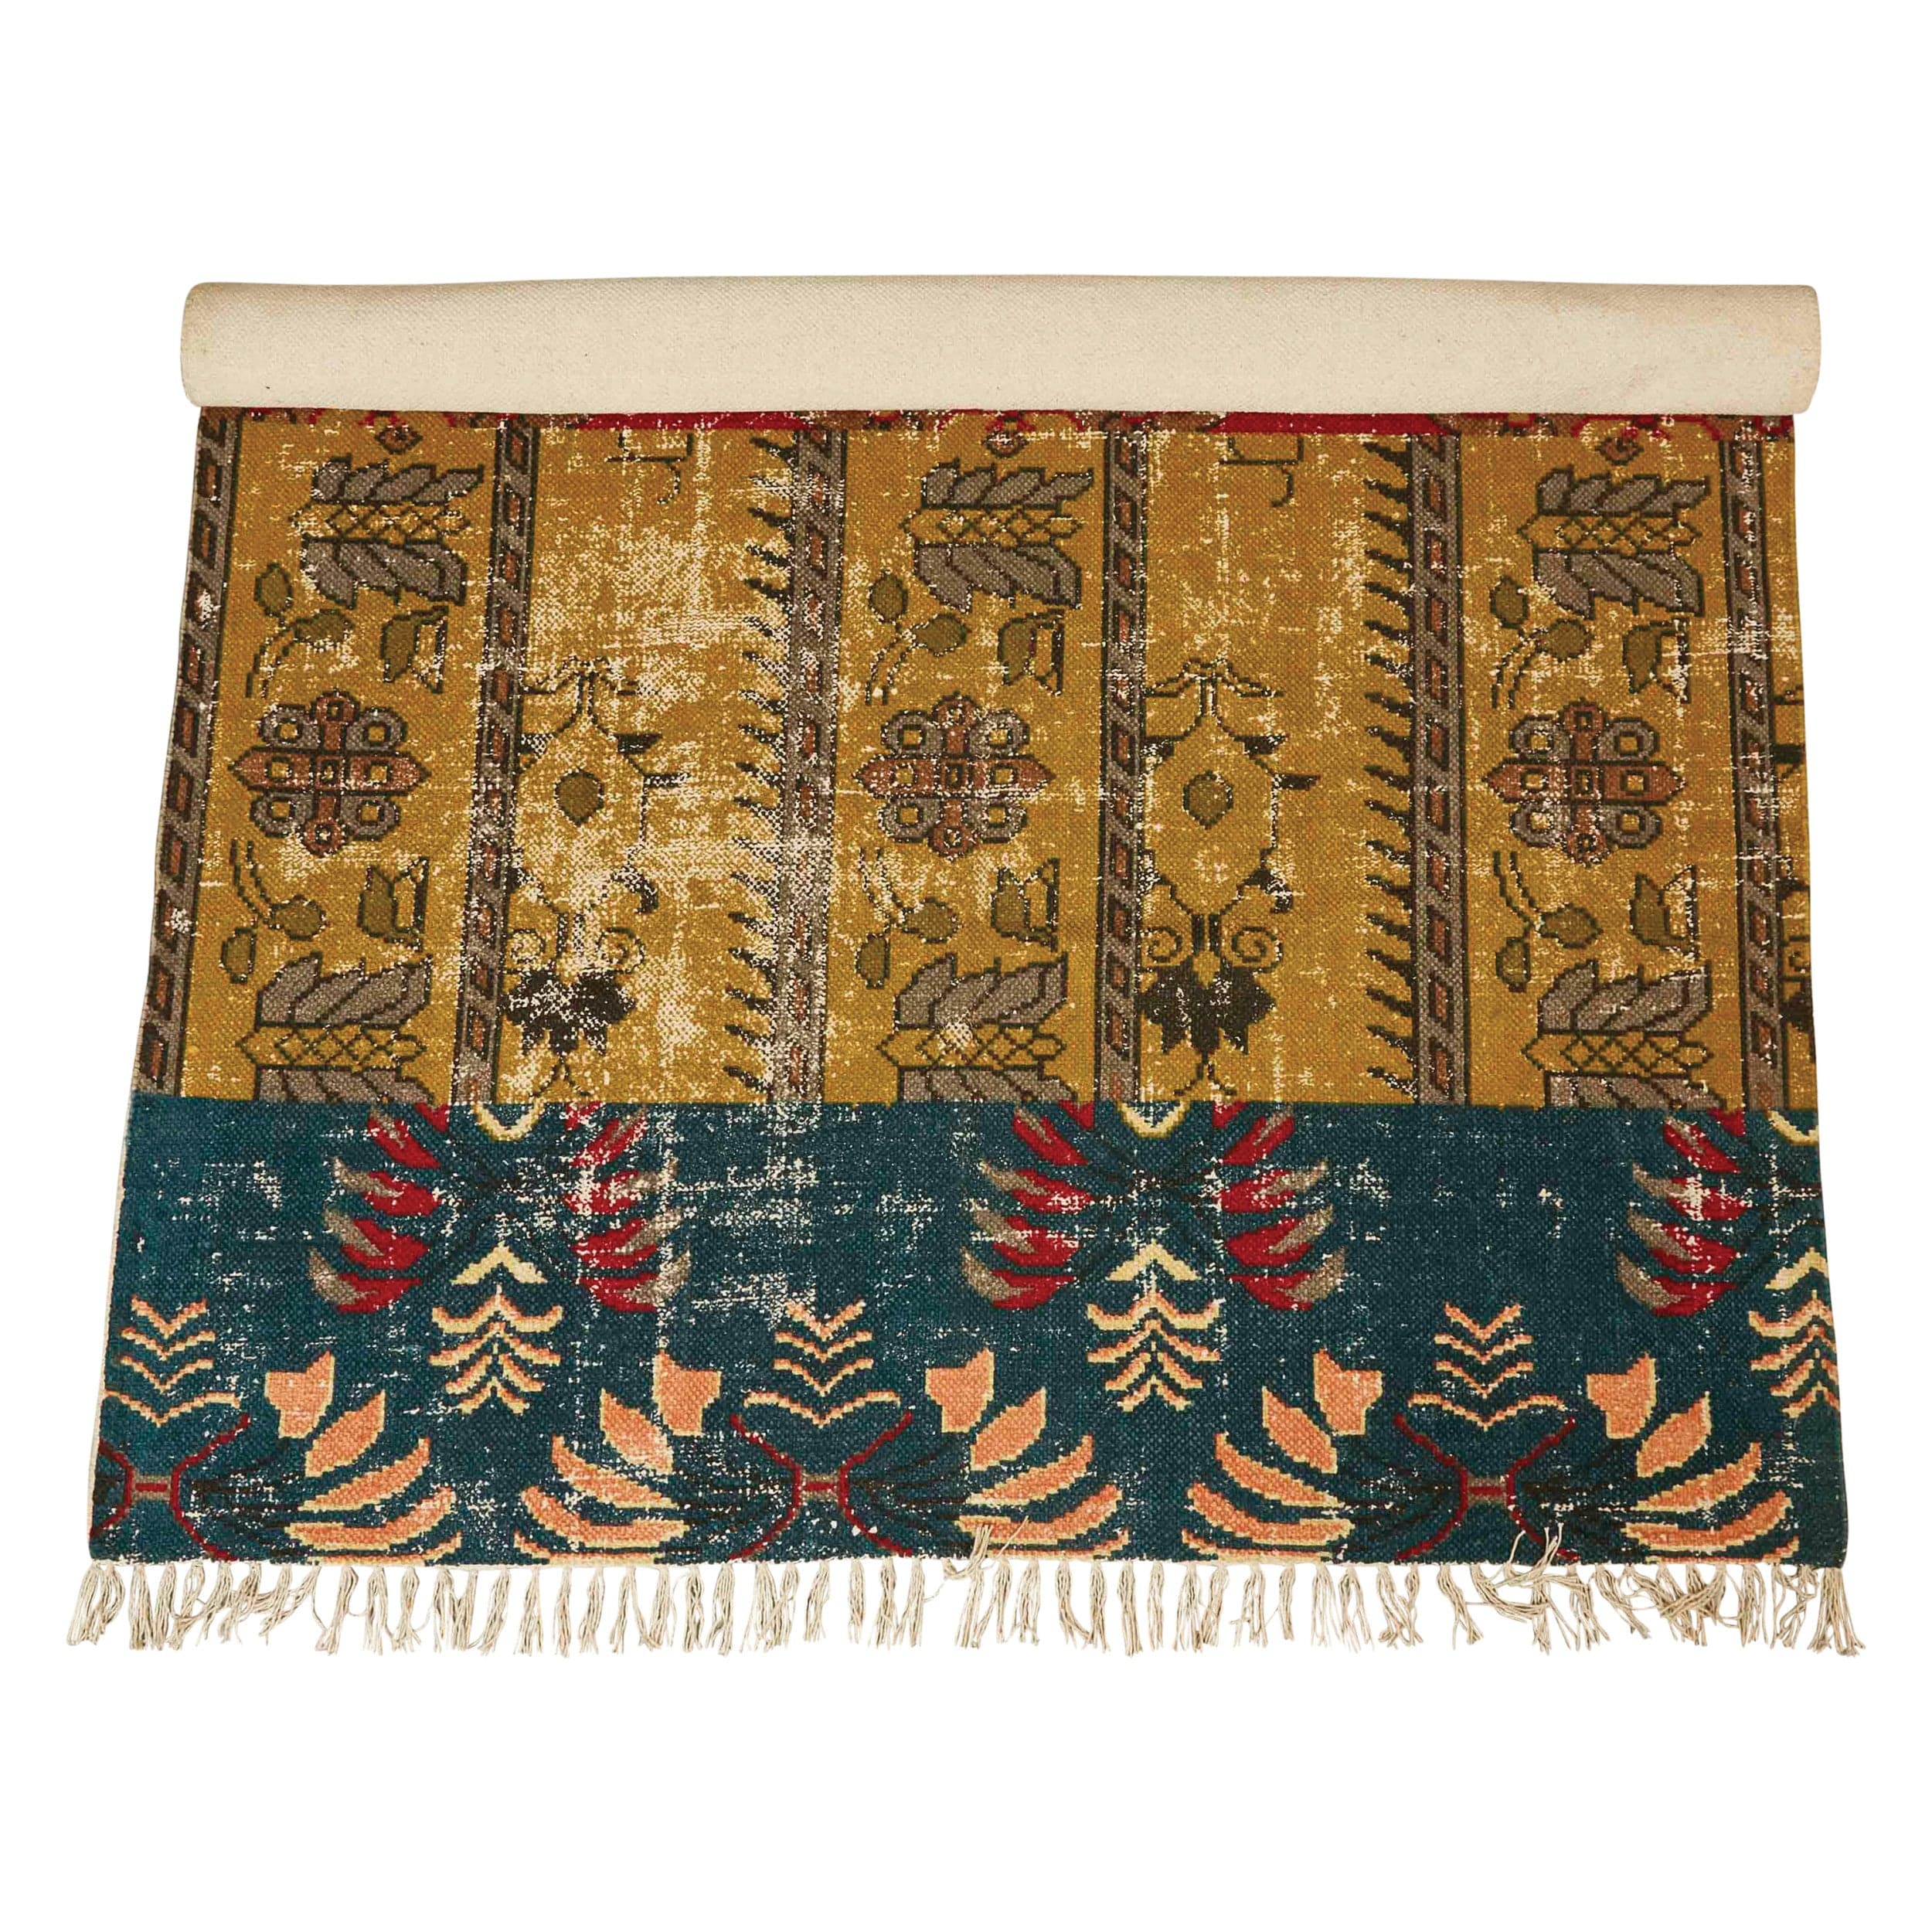 Creative Co-op Creative Co-op Woven Cotton Distressed Printed Rug - Little Miss Muffin Children & Home